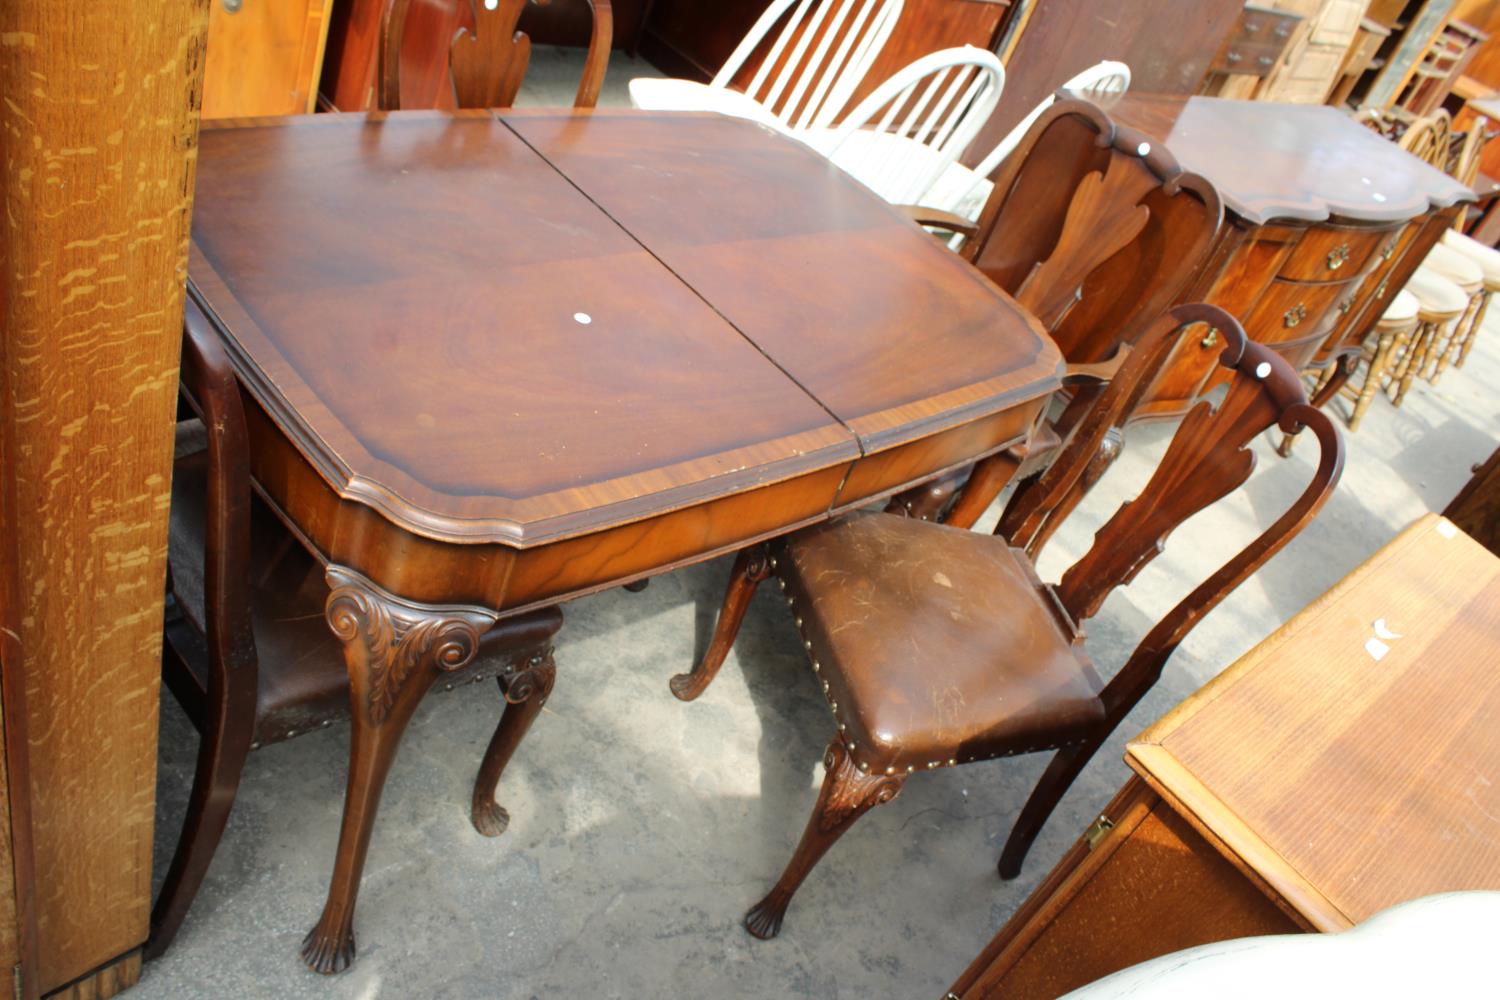 A MID 20TH CENTURY MAHOGANY AND CROSSBANDED WARING AND GILLOW DINING ROOM SUITE ON CABRIOLE LEGS - Image 4 of 6